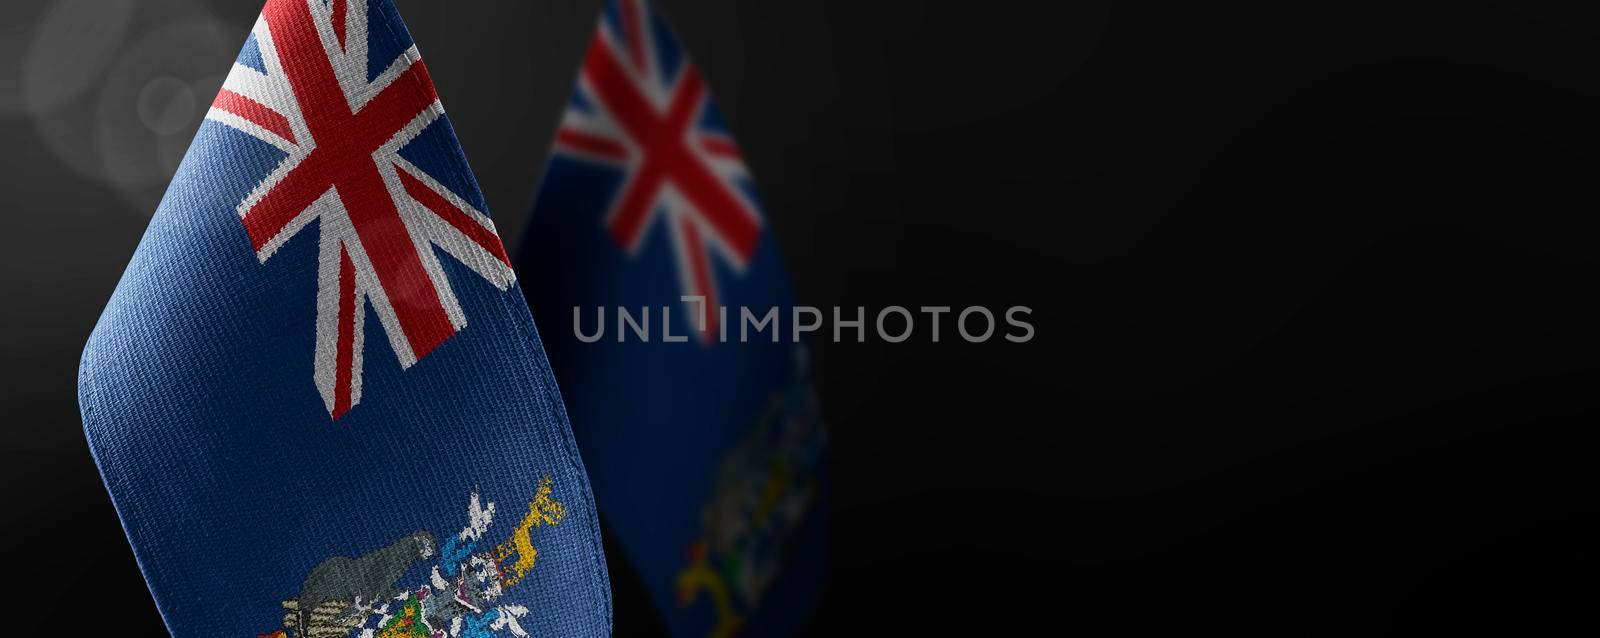 Small national flags of the South Georgia and the South Sandwich Islands on a dark background.